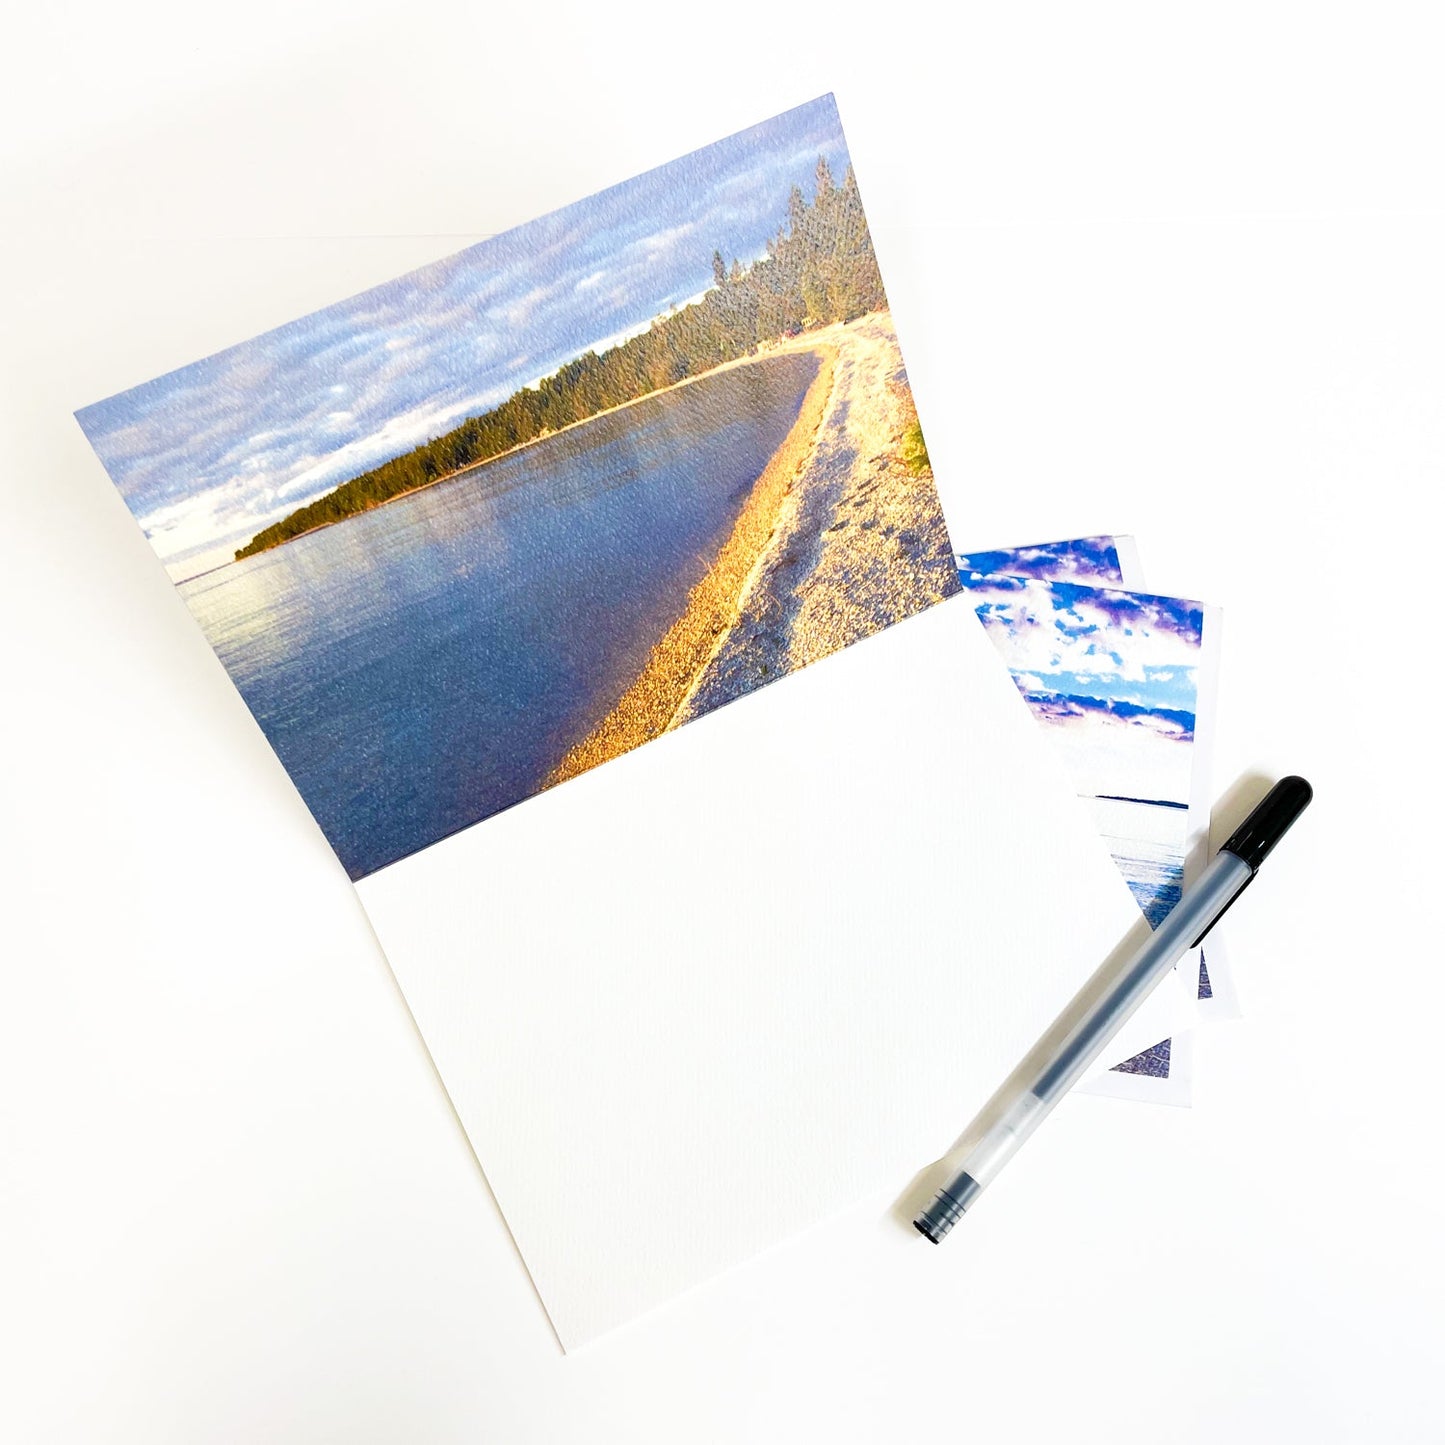 Blank greeting card featuring a photograph of the Mackinac Bridge by local photographer Jennifer Wohletz of Mackinac Island, Michigan.  Open the card to discover another photo inside!  May be customized for Mackinac Island wedding invitations, announcements and thank you notes.  Made in Michigan.  